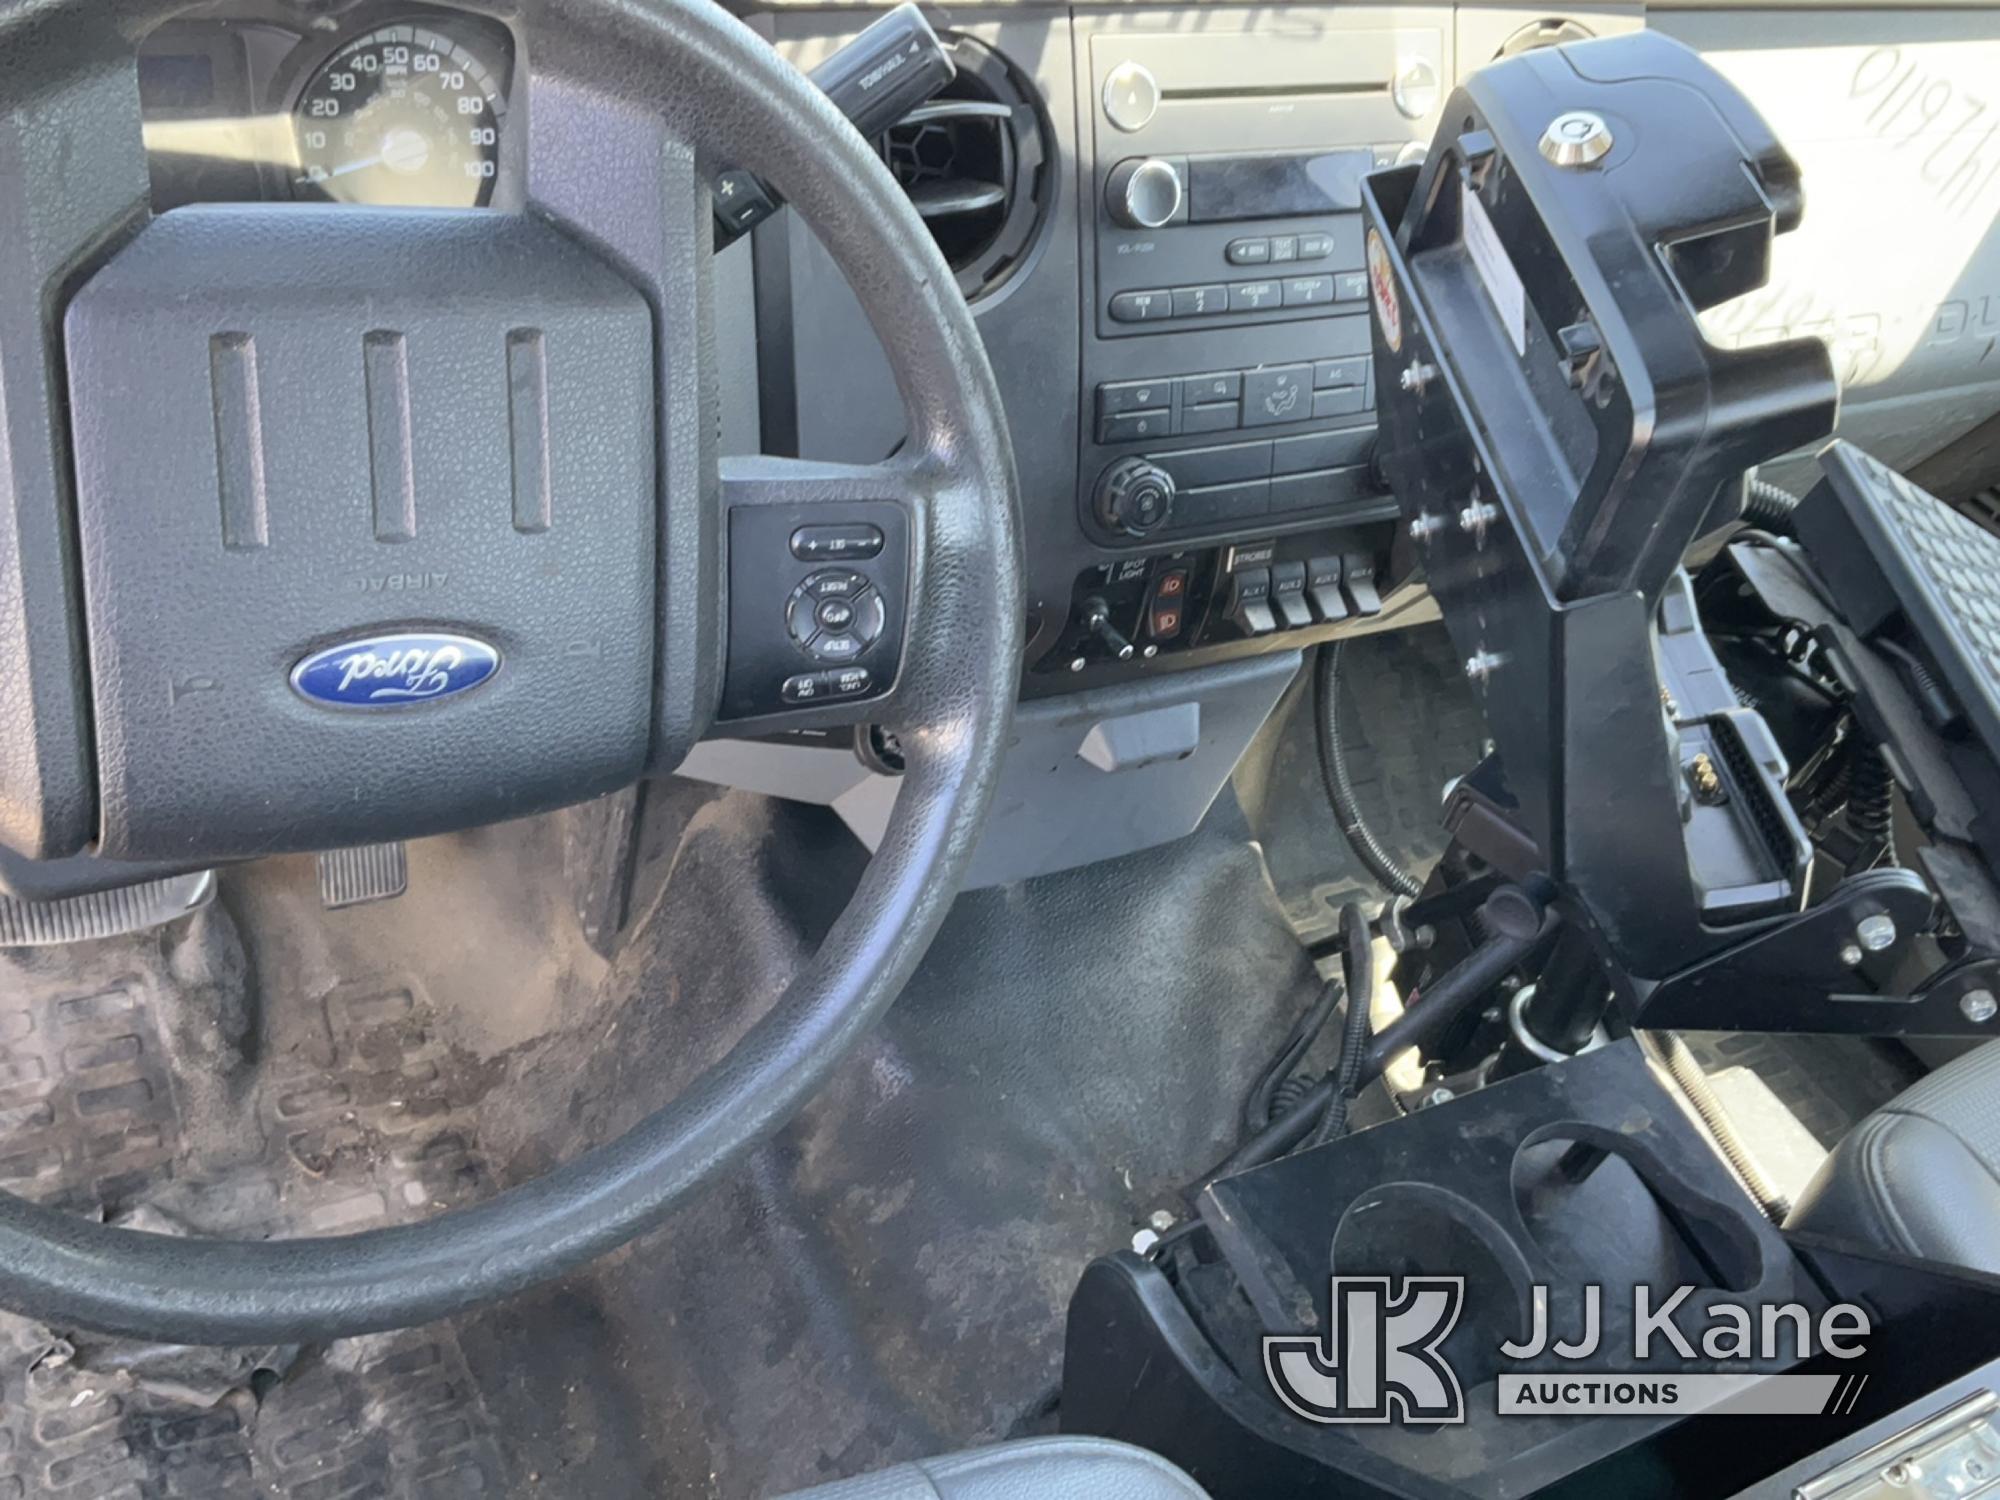 (Dixon, CA) 2016 Ford F350 Pickup Truck Not Running, Condition Unknown) (No Key